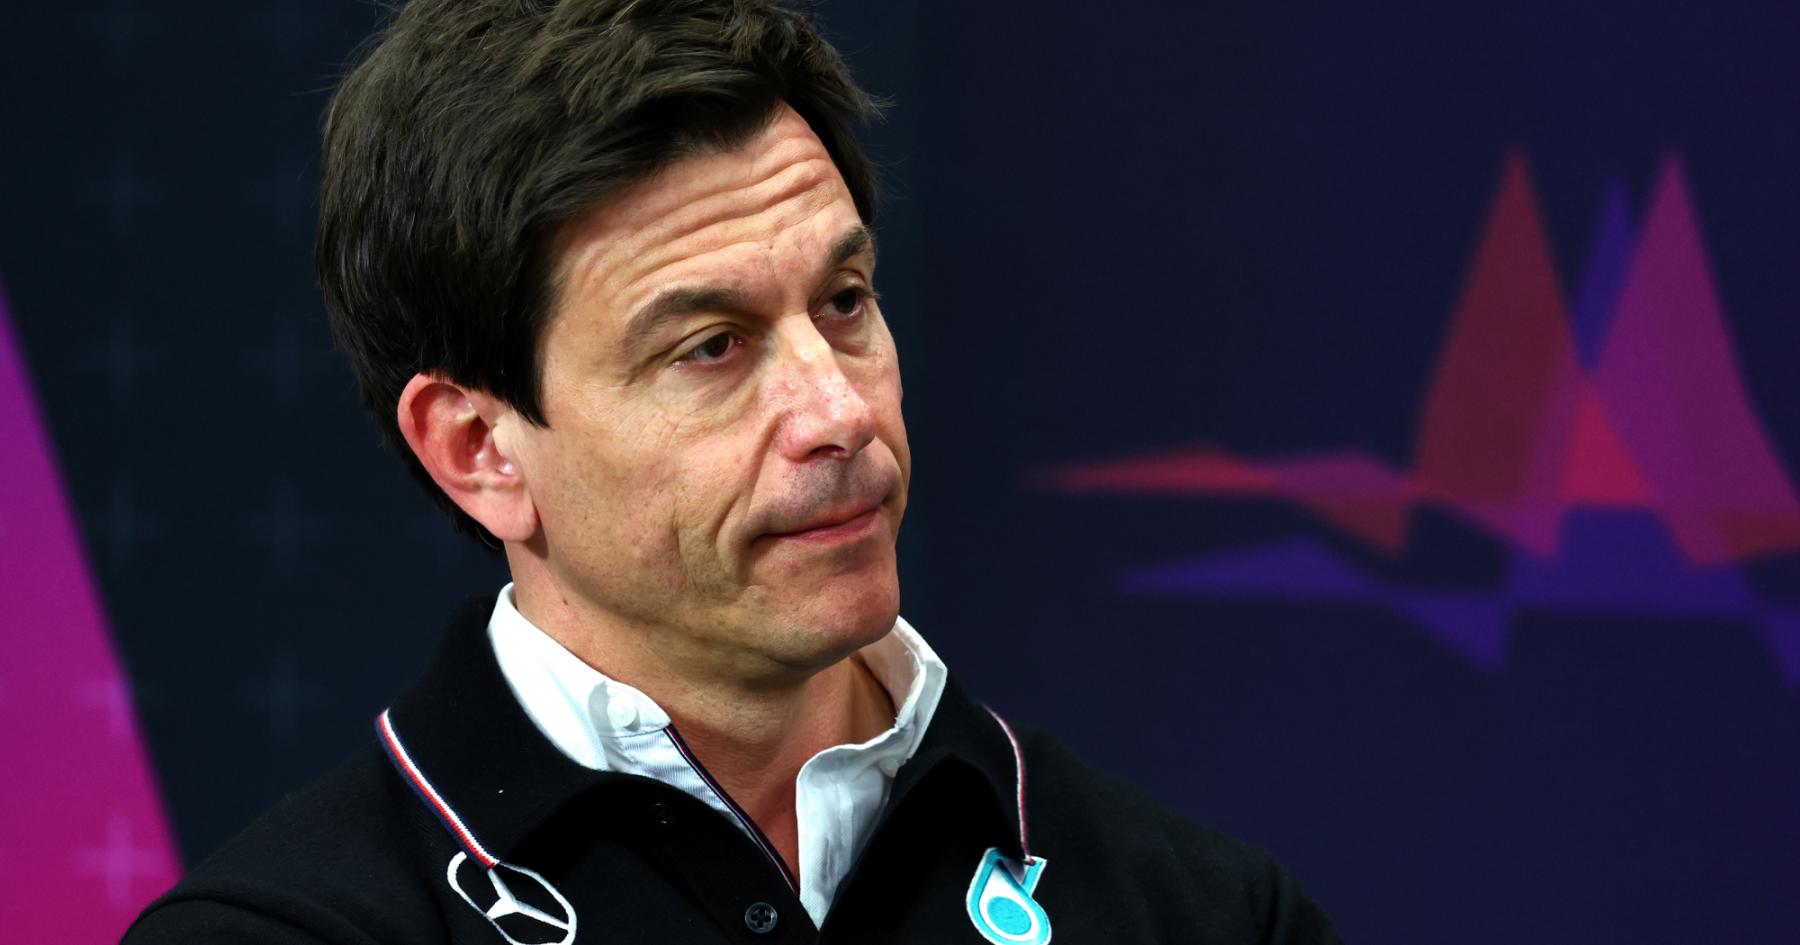 Formula 1 Turmoil: Wolff Challenges Verstappen's Dominance in High-Stakes Racing